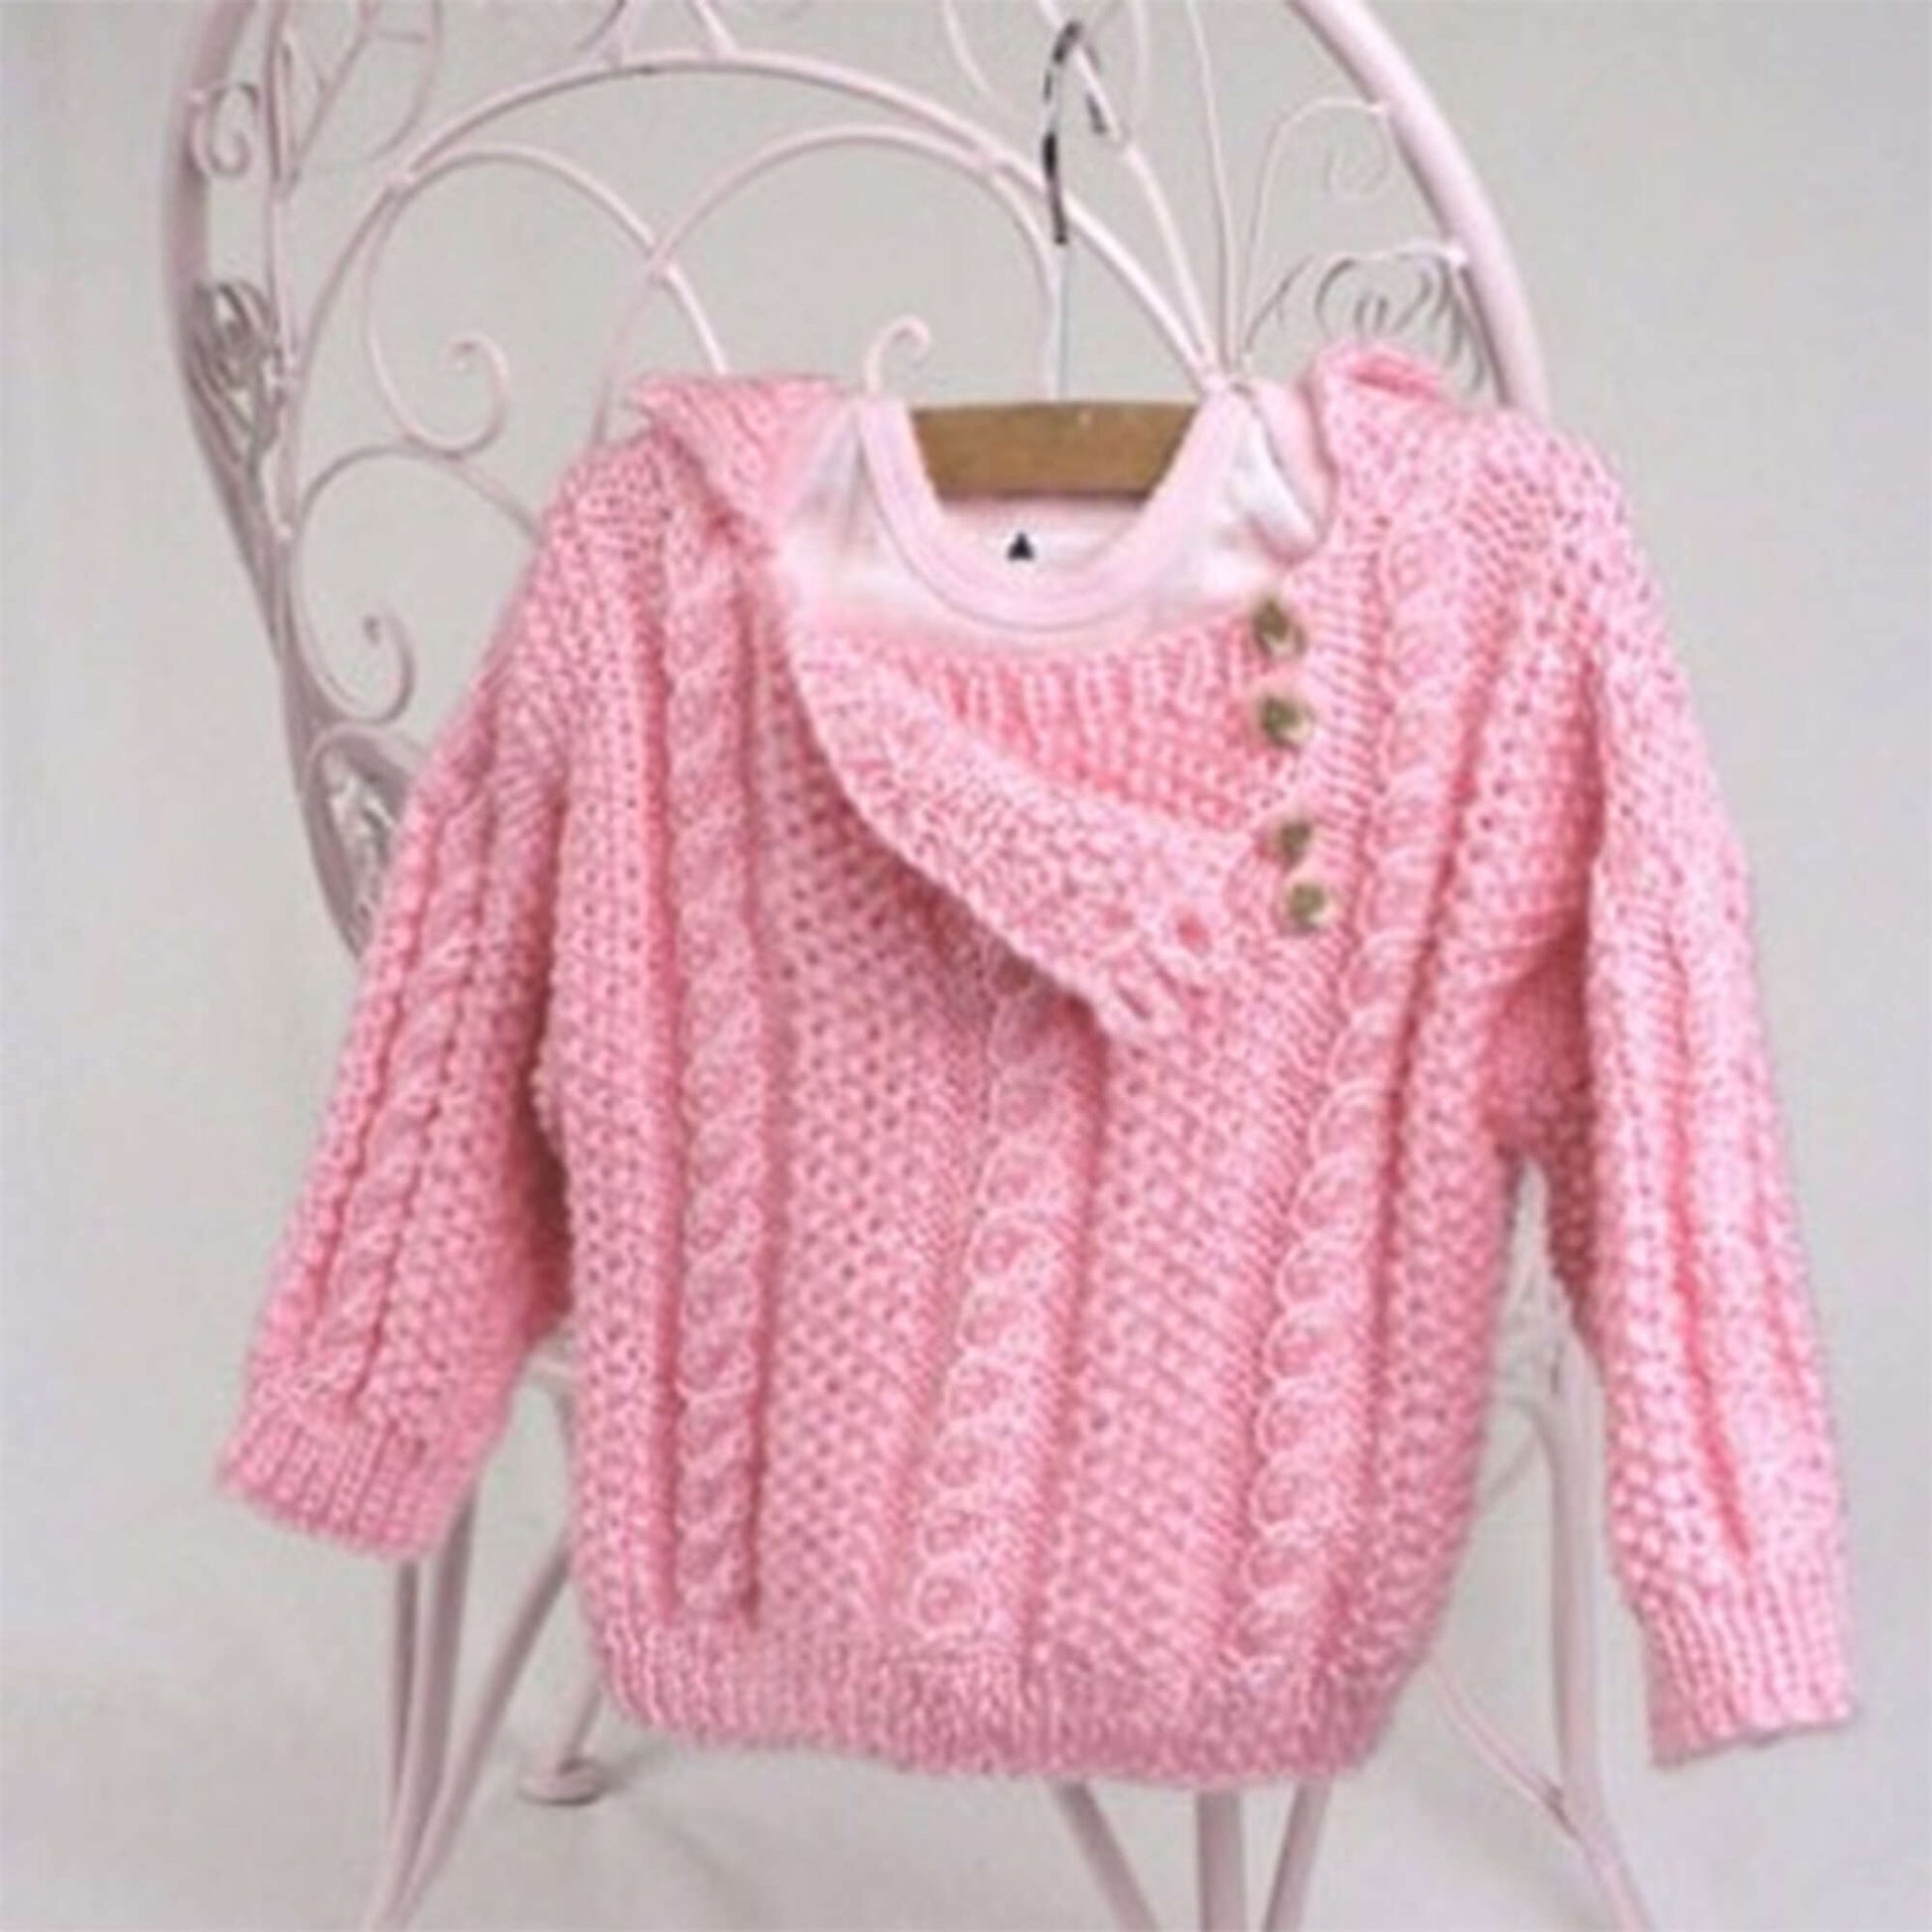 Free Caron Cabled Toddler Pullover Knit Pattern